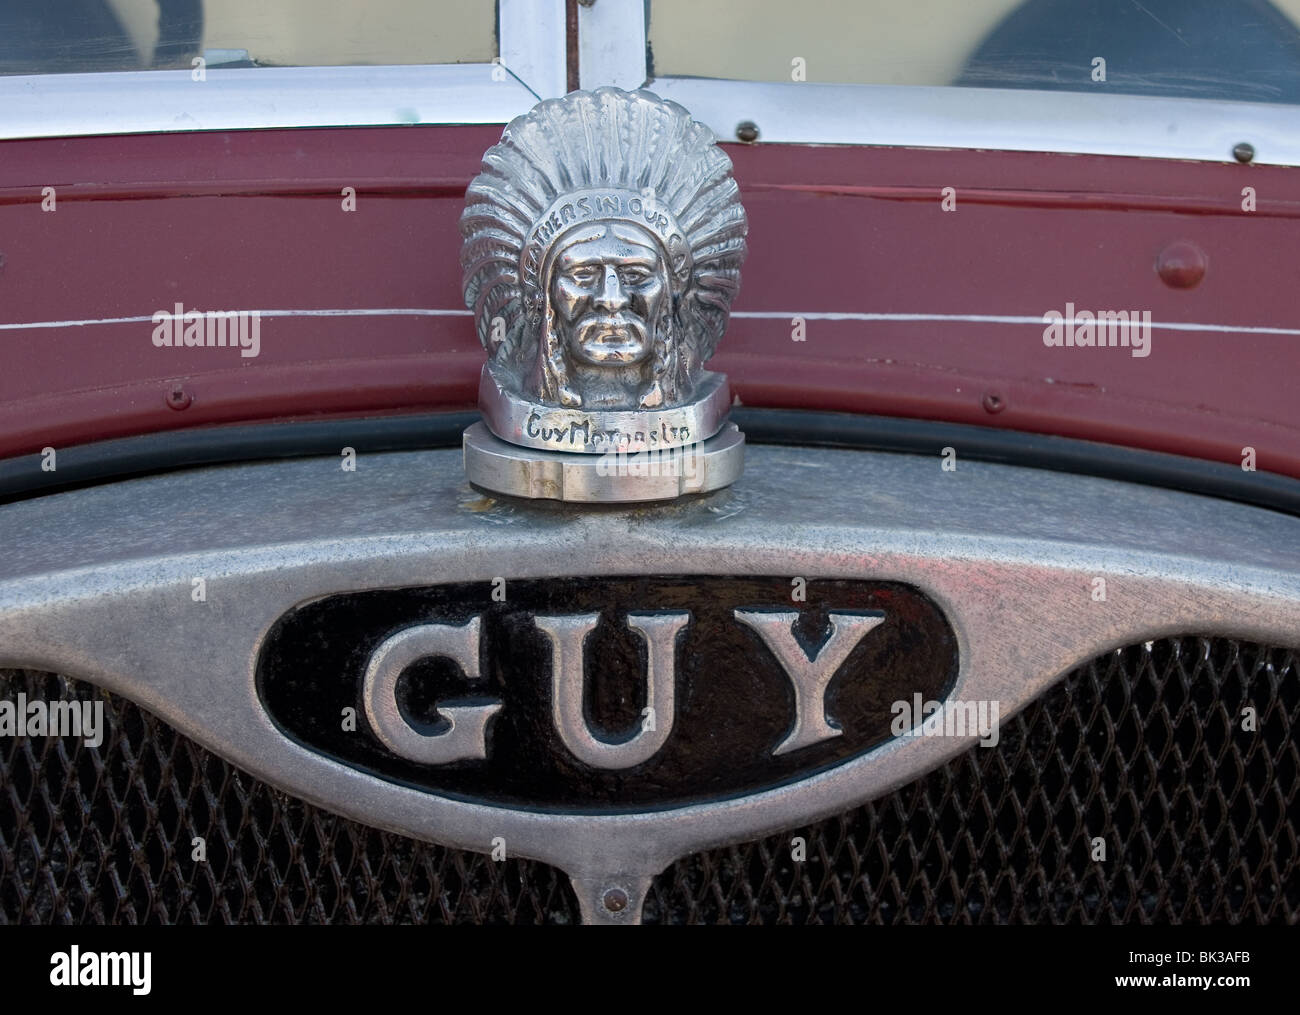 Guy Motors radiator cap in the shape of a Red Indian in his Feathered Headdress with the slogan Feather In Our Cap Stock Photo